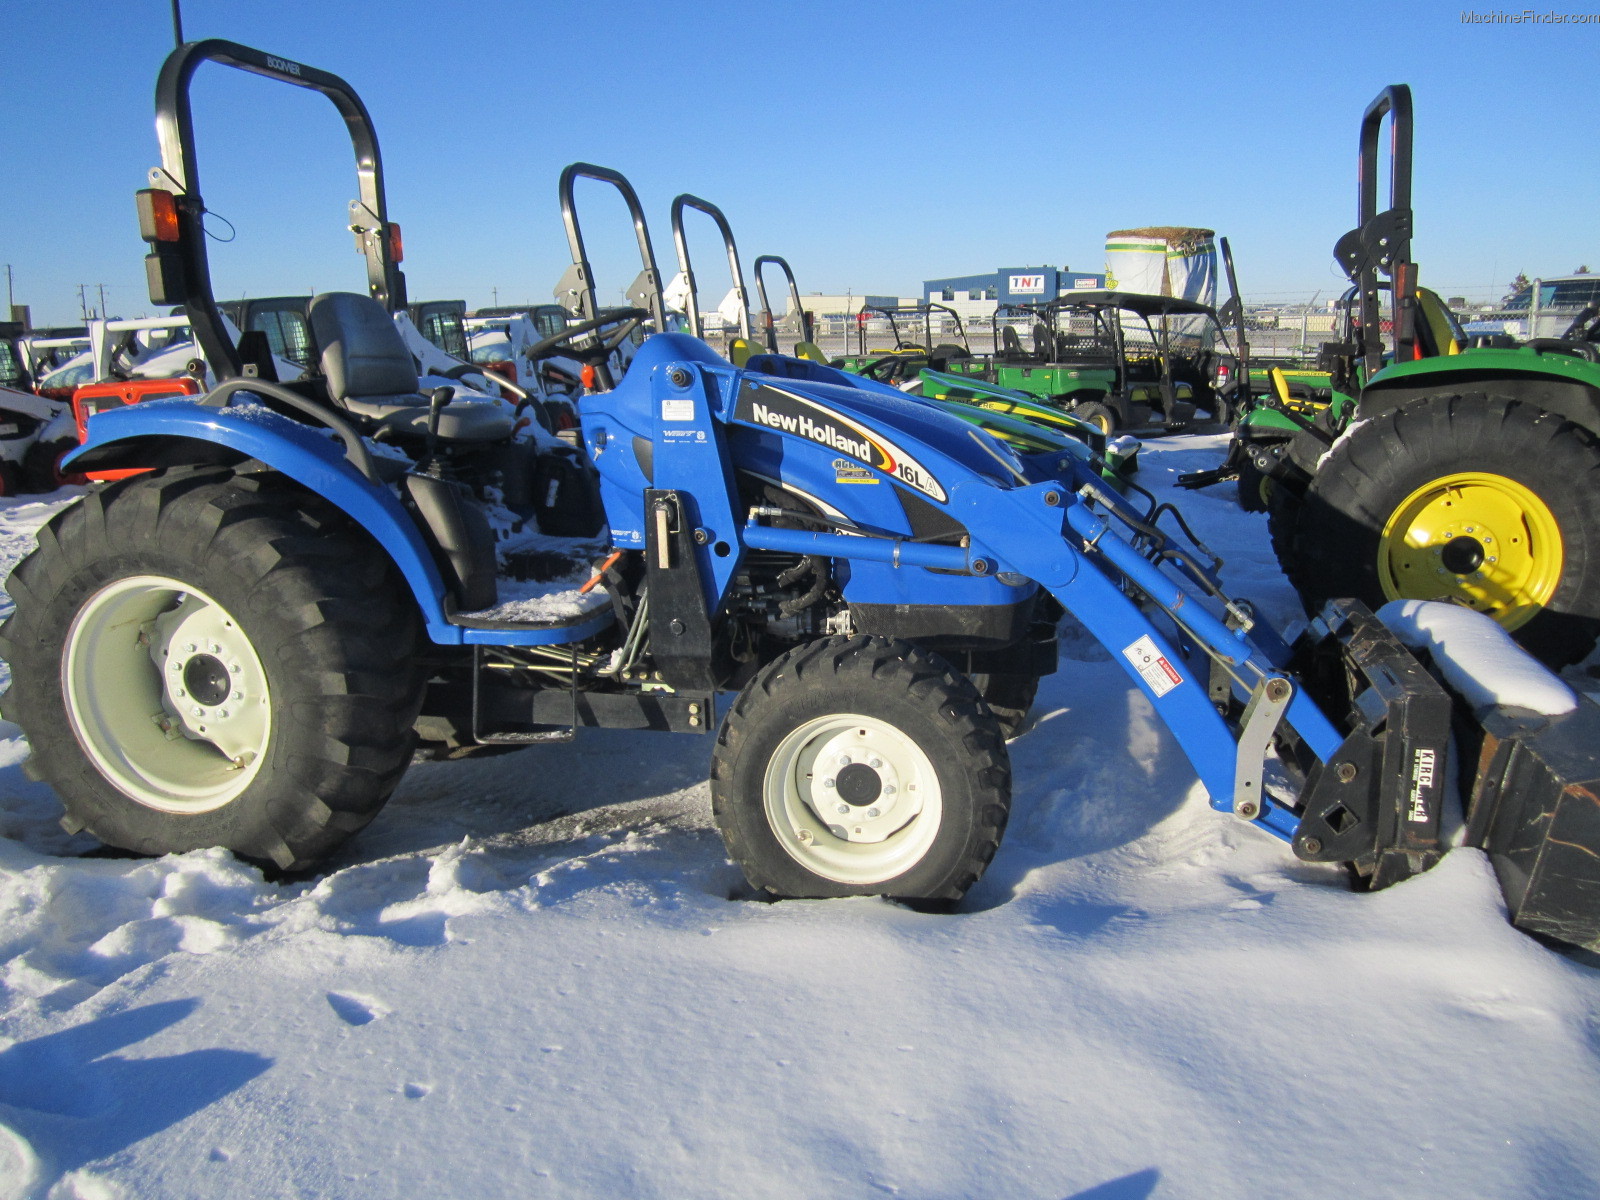 Ford new holland compact tractors